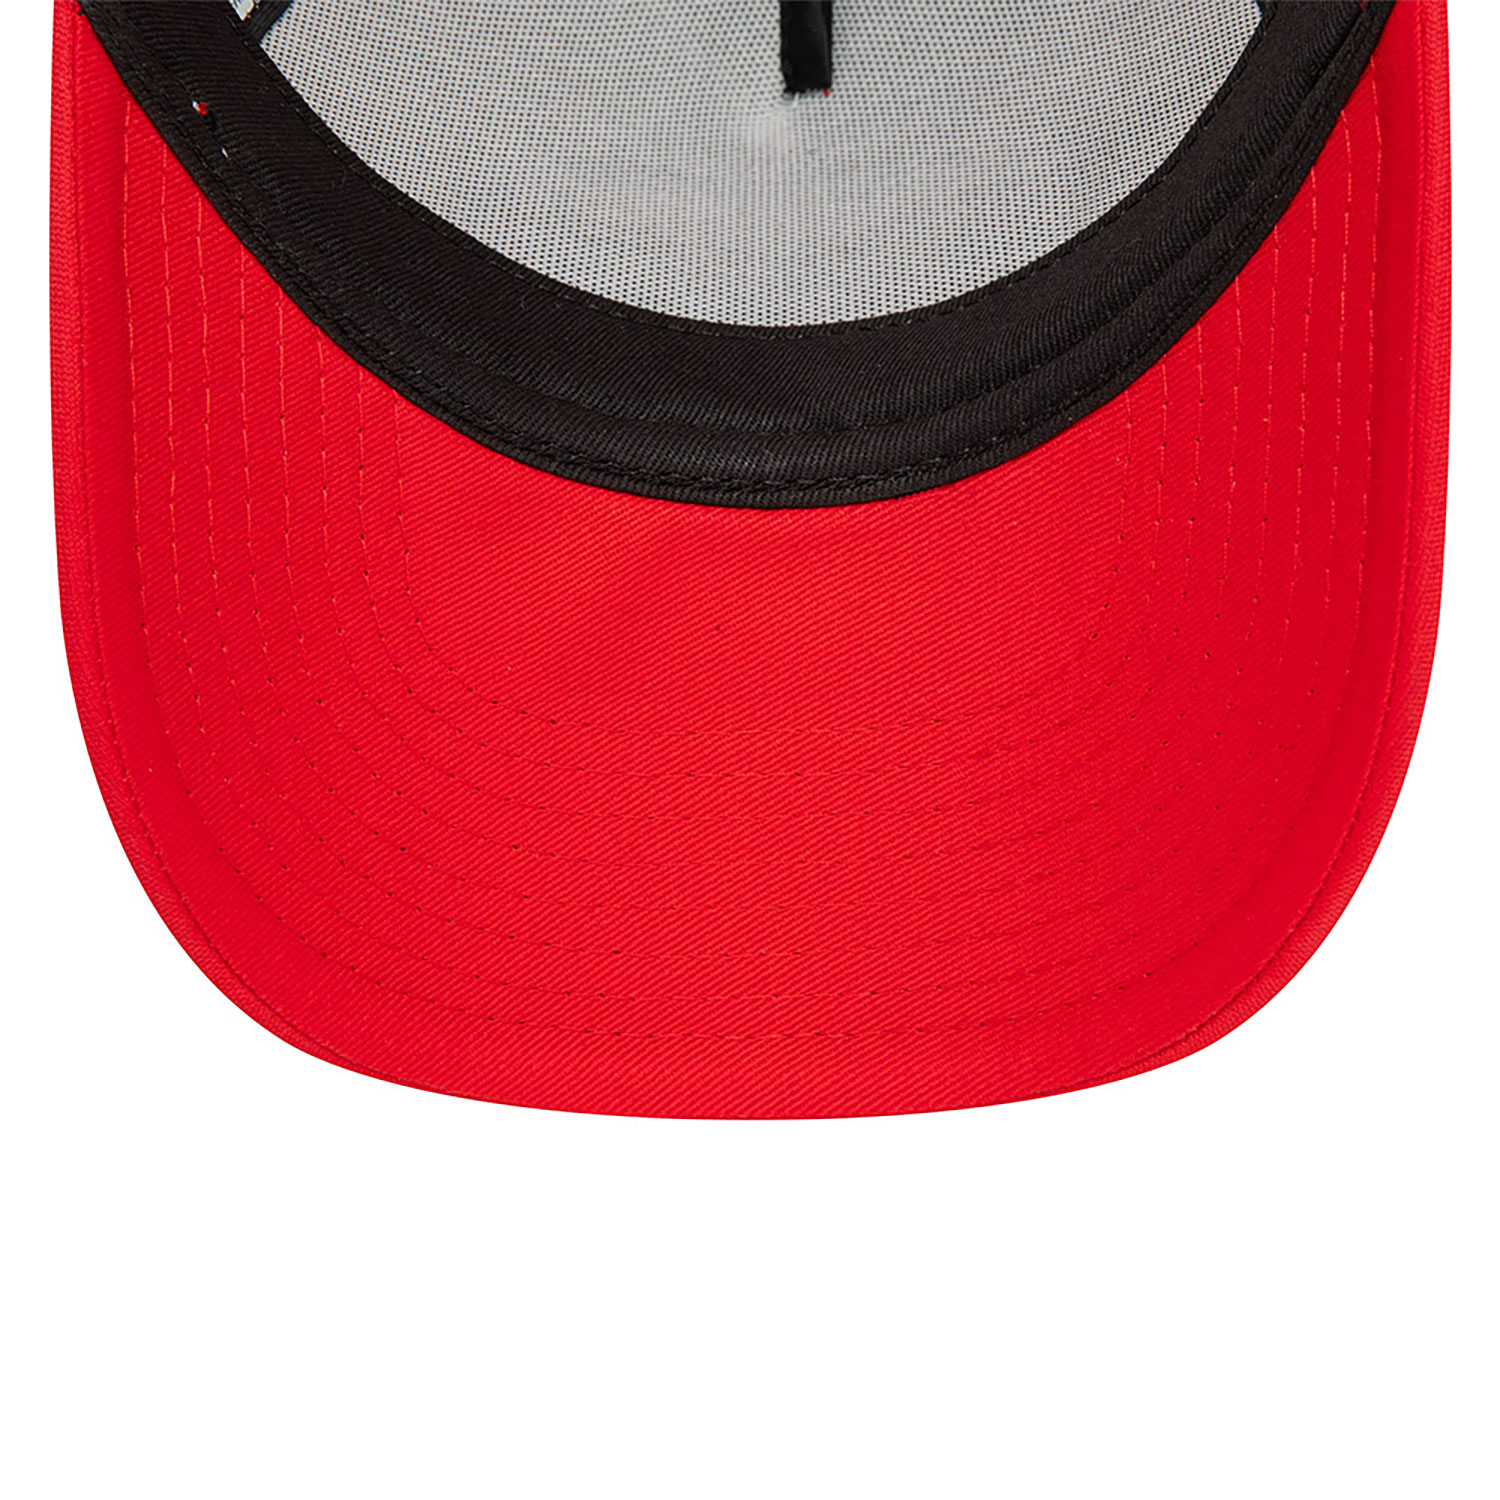 New Era Youth Red Oval Trucker Cap